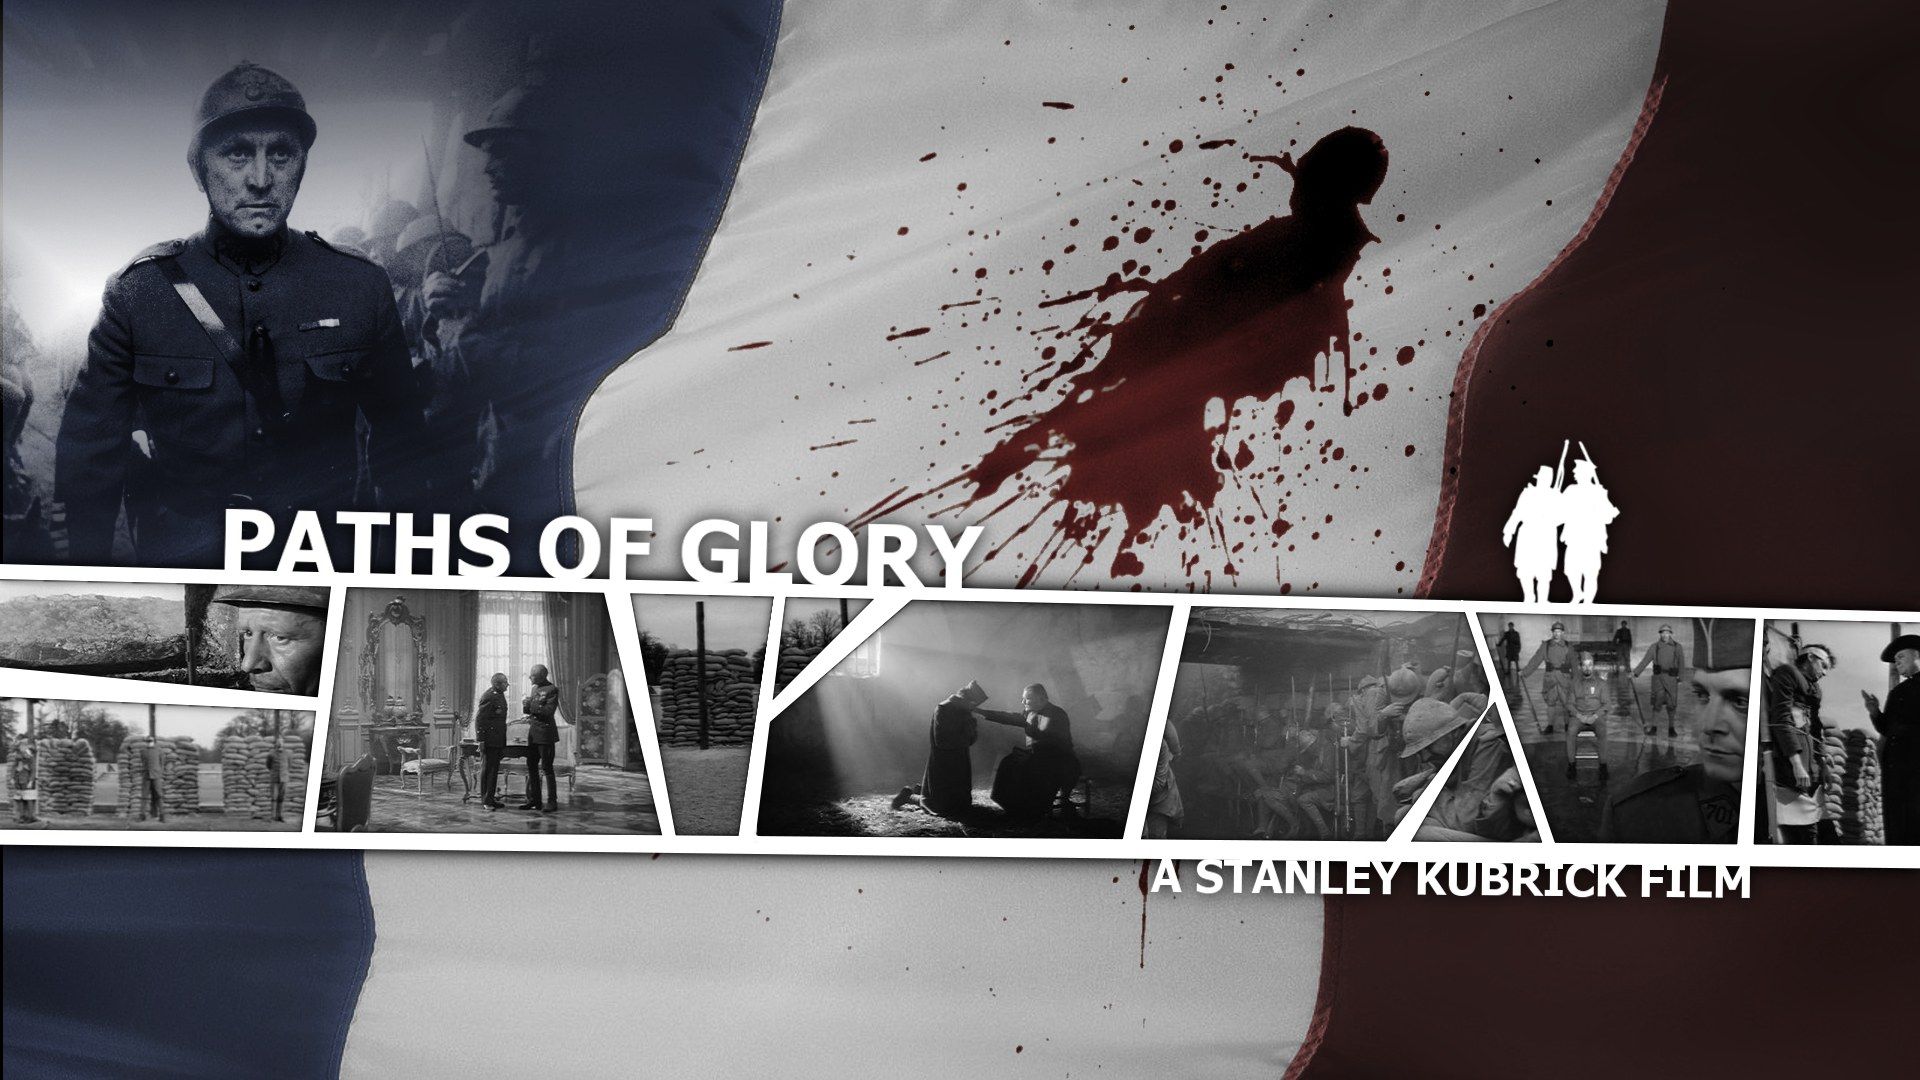 Free download Paths of Glory Wallpaper 19202151080 m00chs m00vies [1920x1080] for your Desktop, Mobile & Tablet. Explore Kubrick Wallpaper. Kubrick Wallpaper, Stanley Kubrick Wallpaper